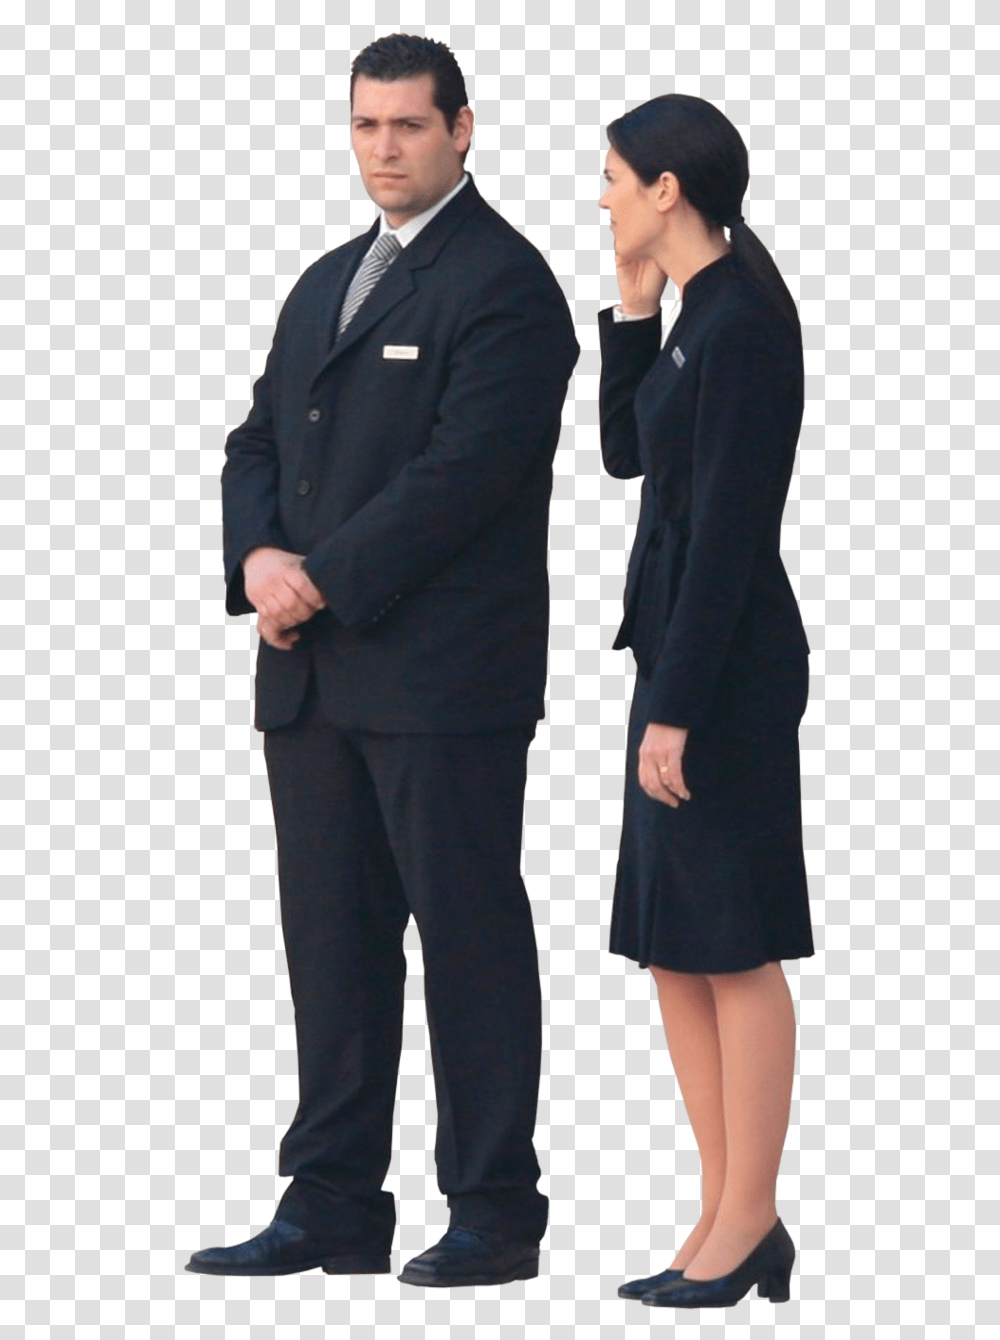 Business People Talking Image Business People, Clothing, Apparel, Suit, Overcoat Transparent Png